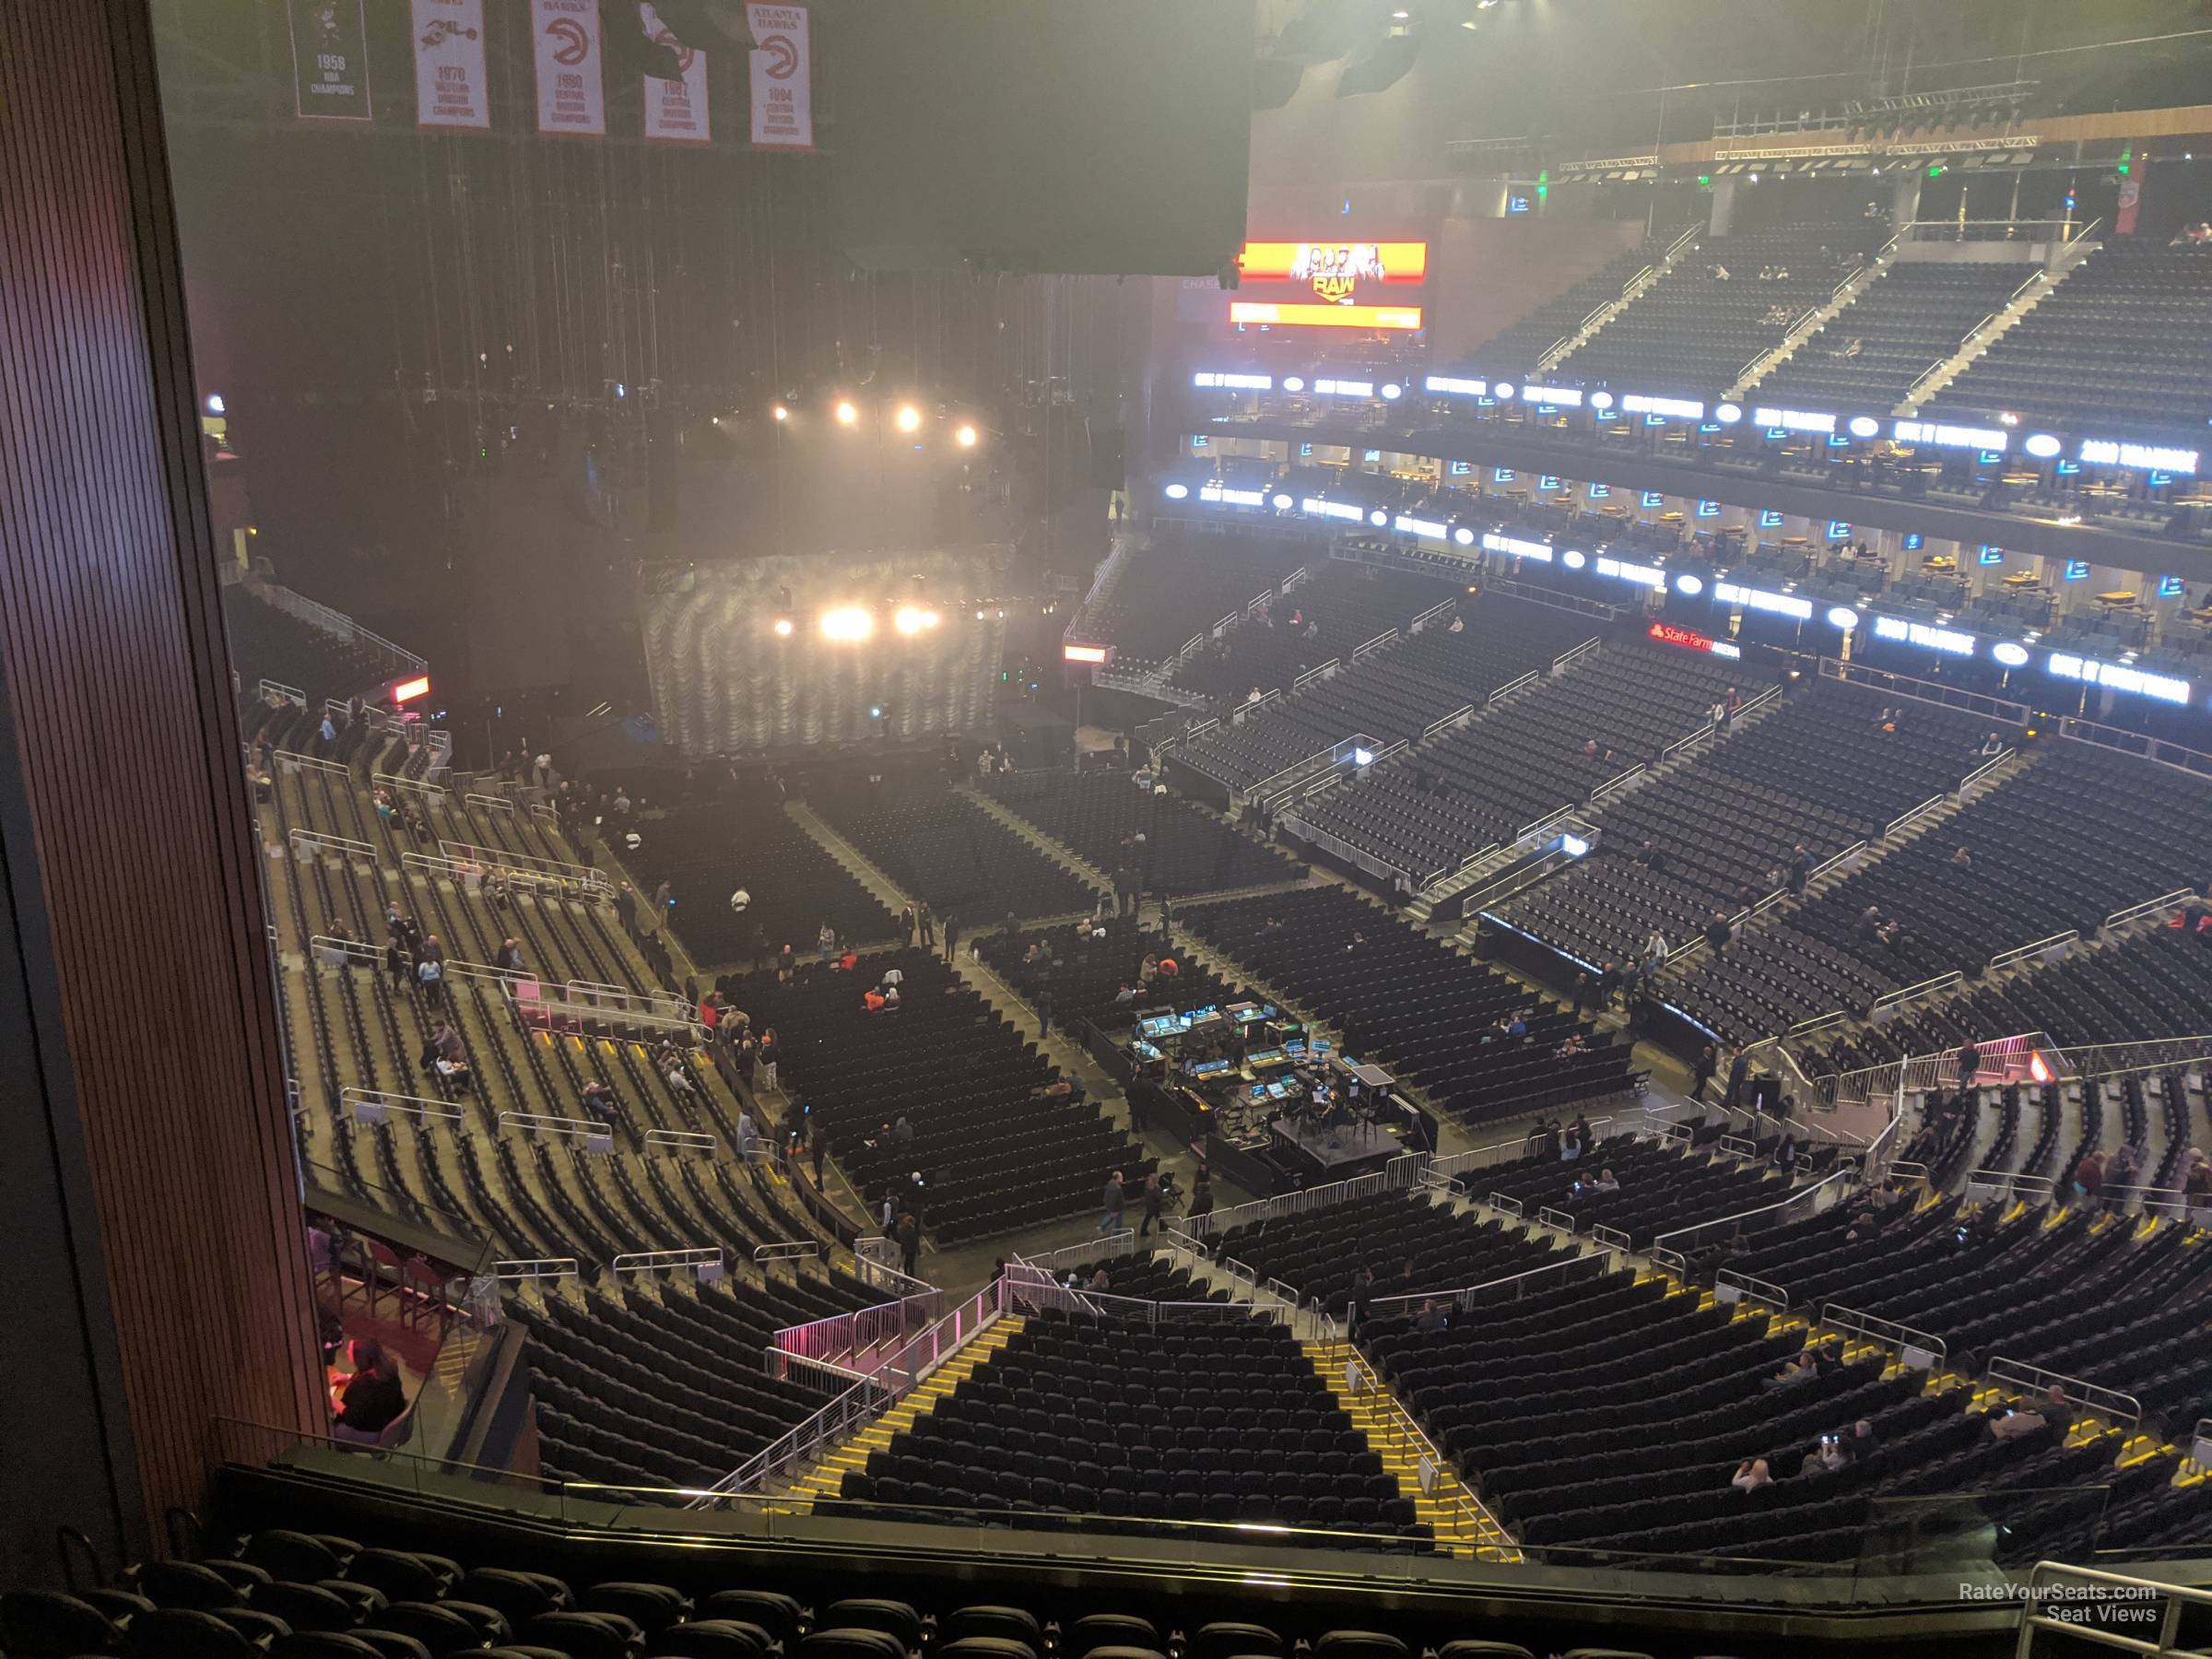 State Farm Arena, section 210, row F, seat 3 - Twice tour: 4th World Tour  III, Shared Anonymously